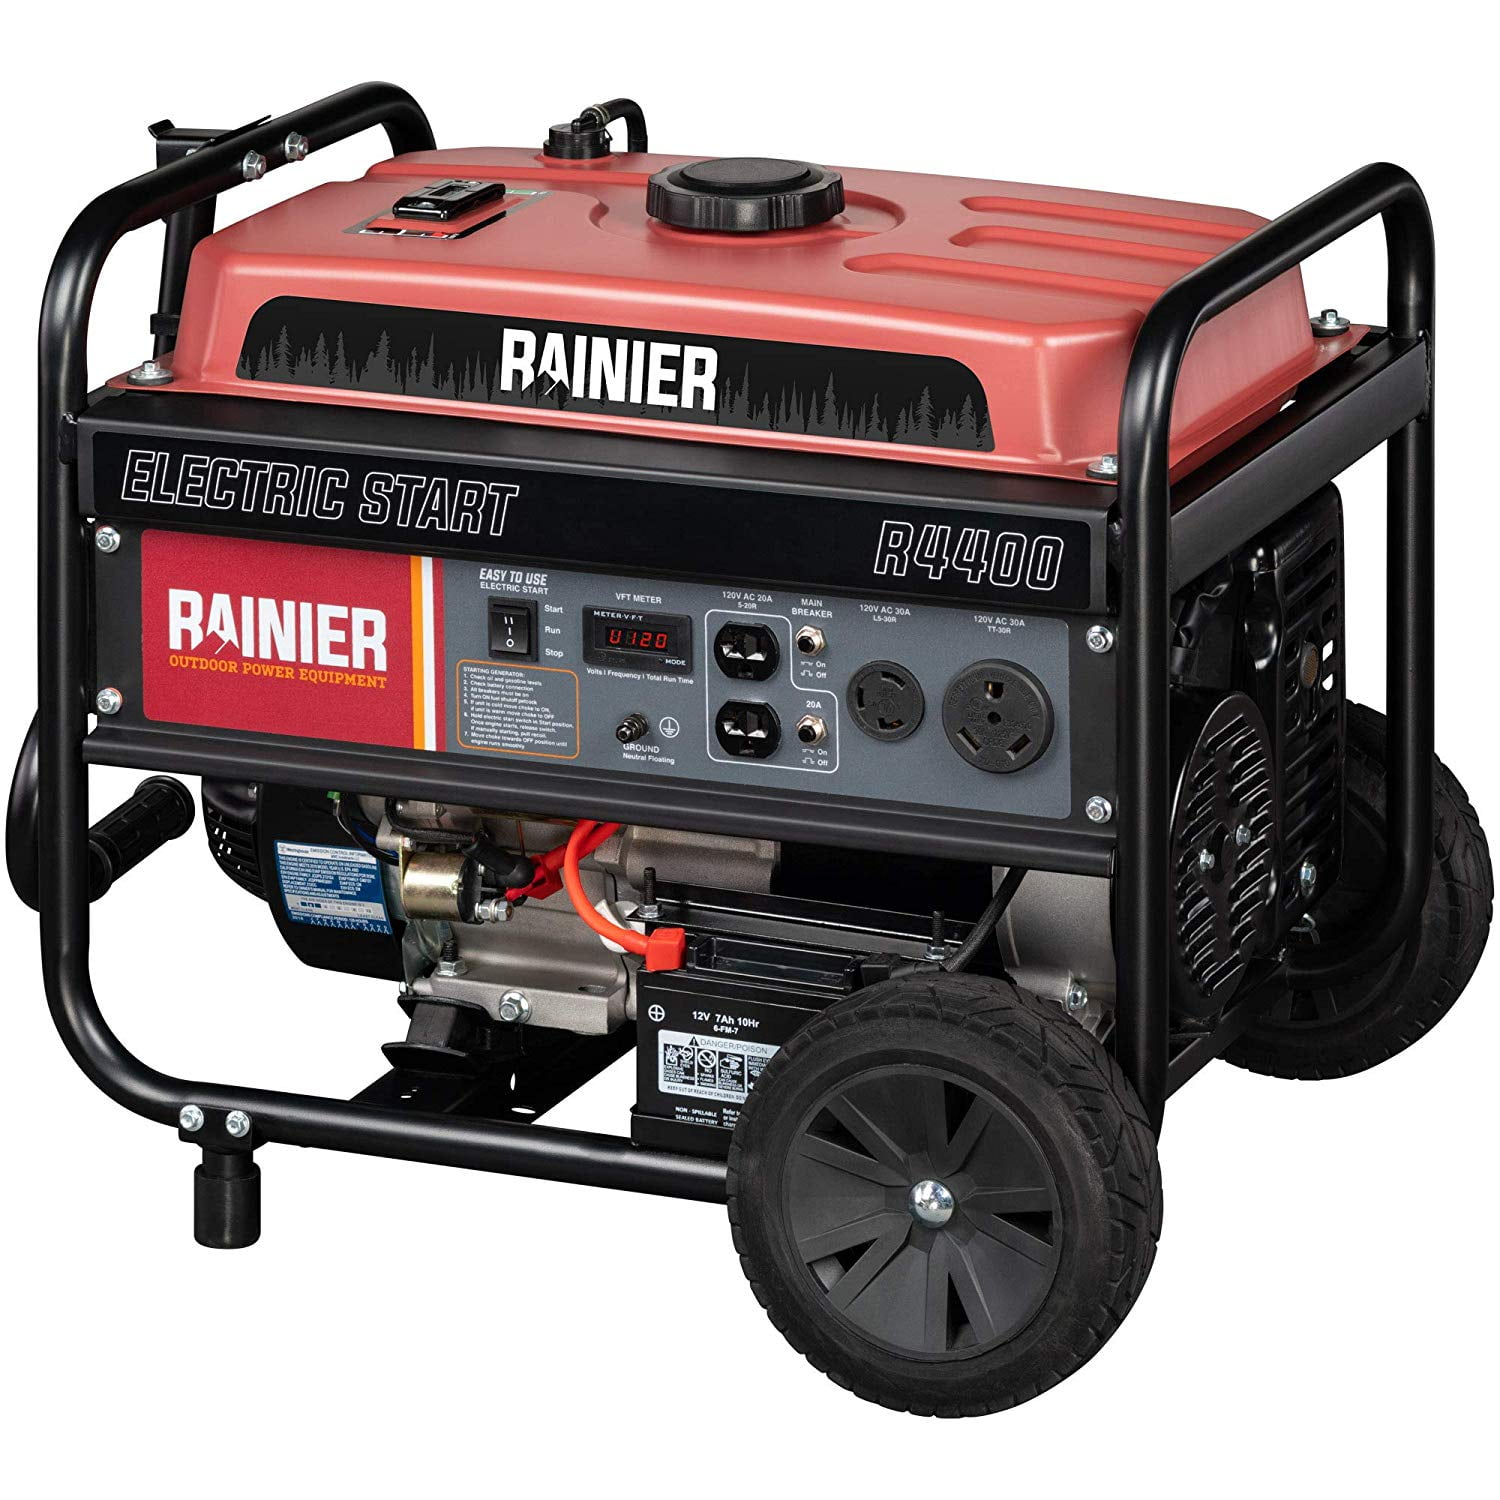 Rainier R4400 Portable Generator with Electric Start CARB Compliant Gas Powered 4400 Peak Watts & 3600 Rated Watts 